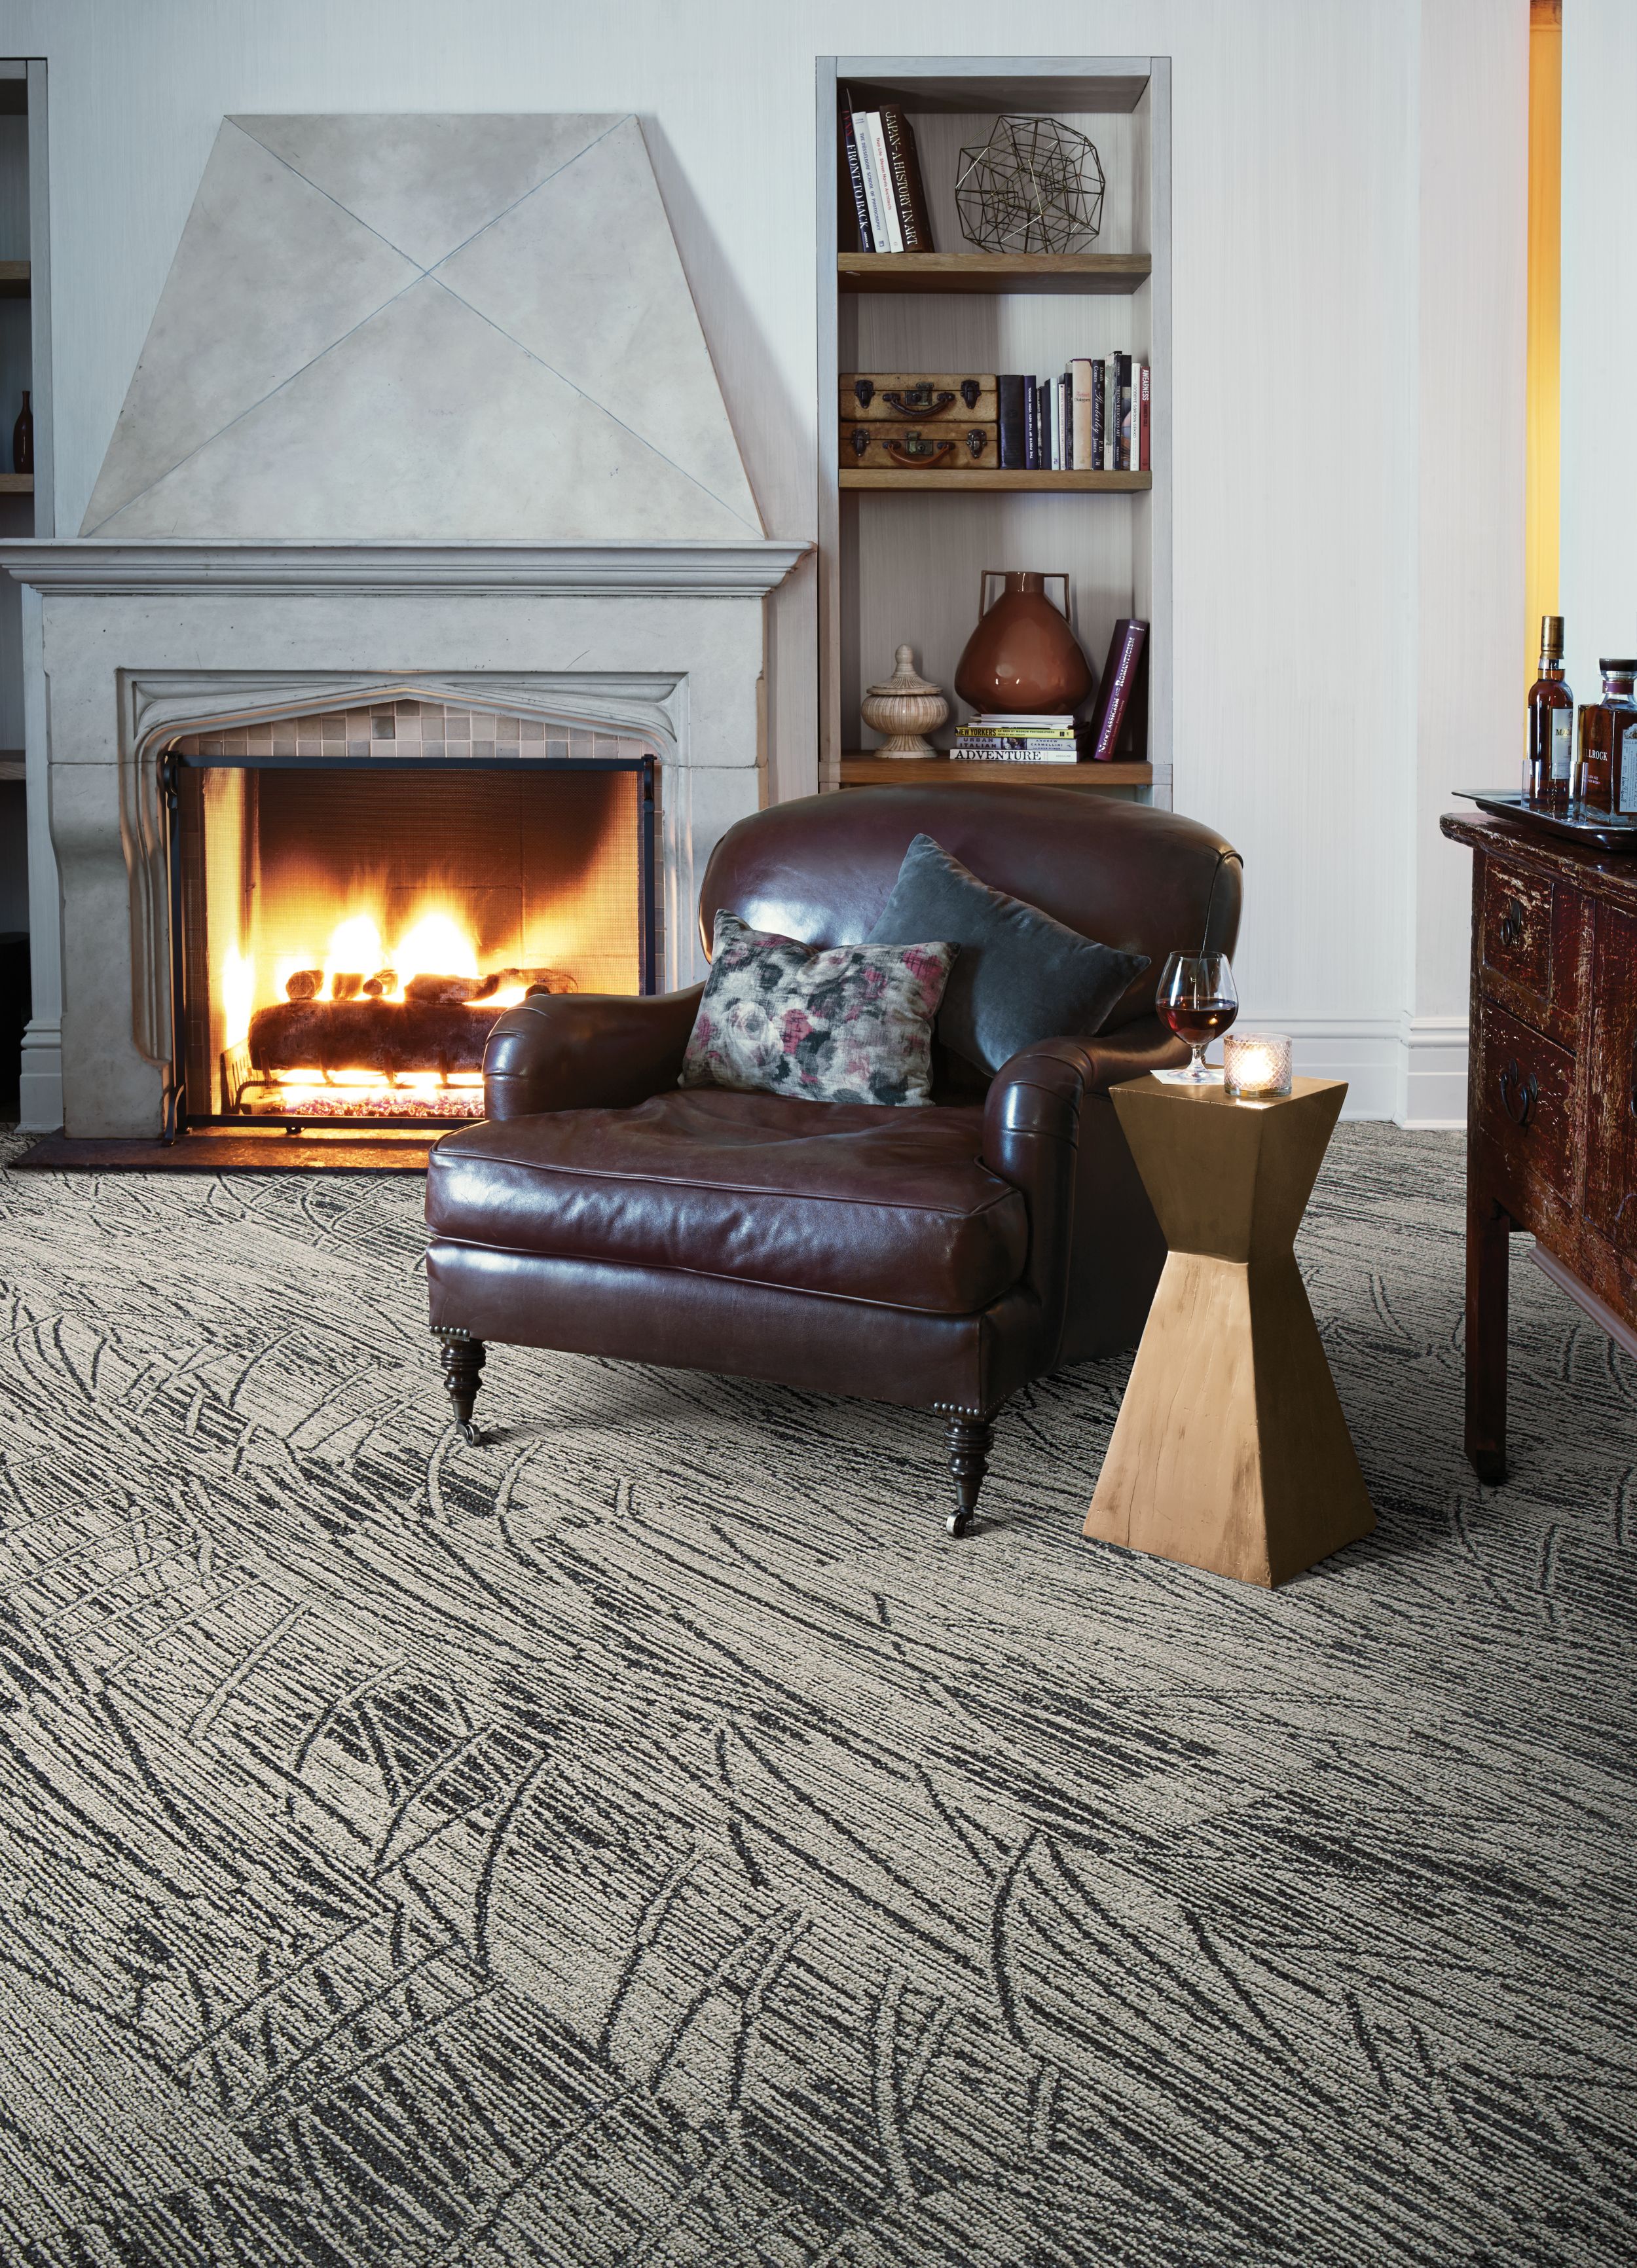 Interface WE152 plank carpet tile in sitting area with fireplace and large leather chair image number 2